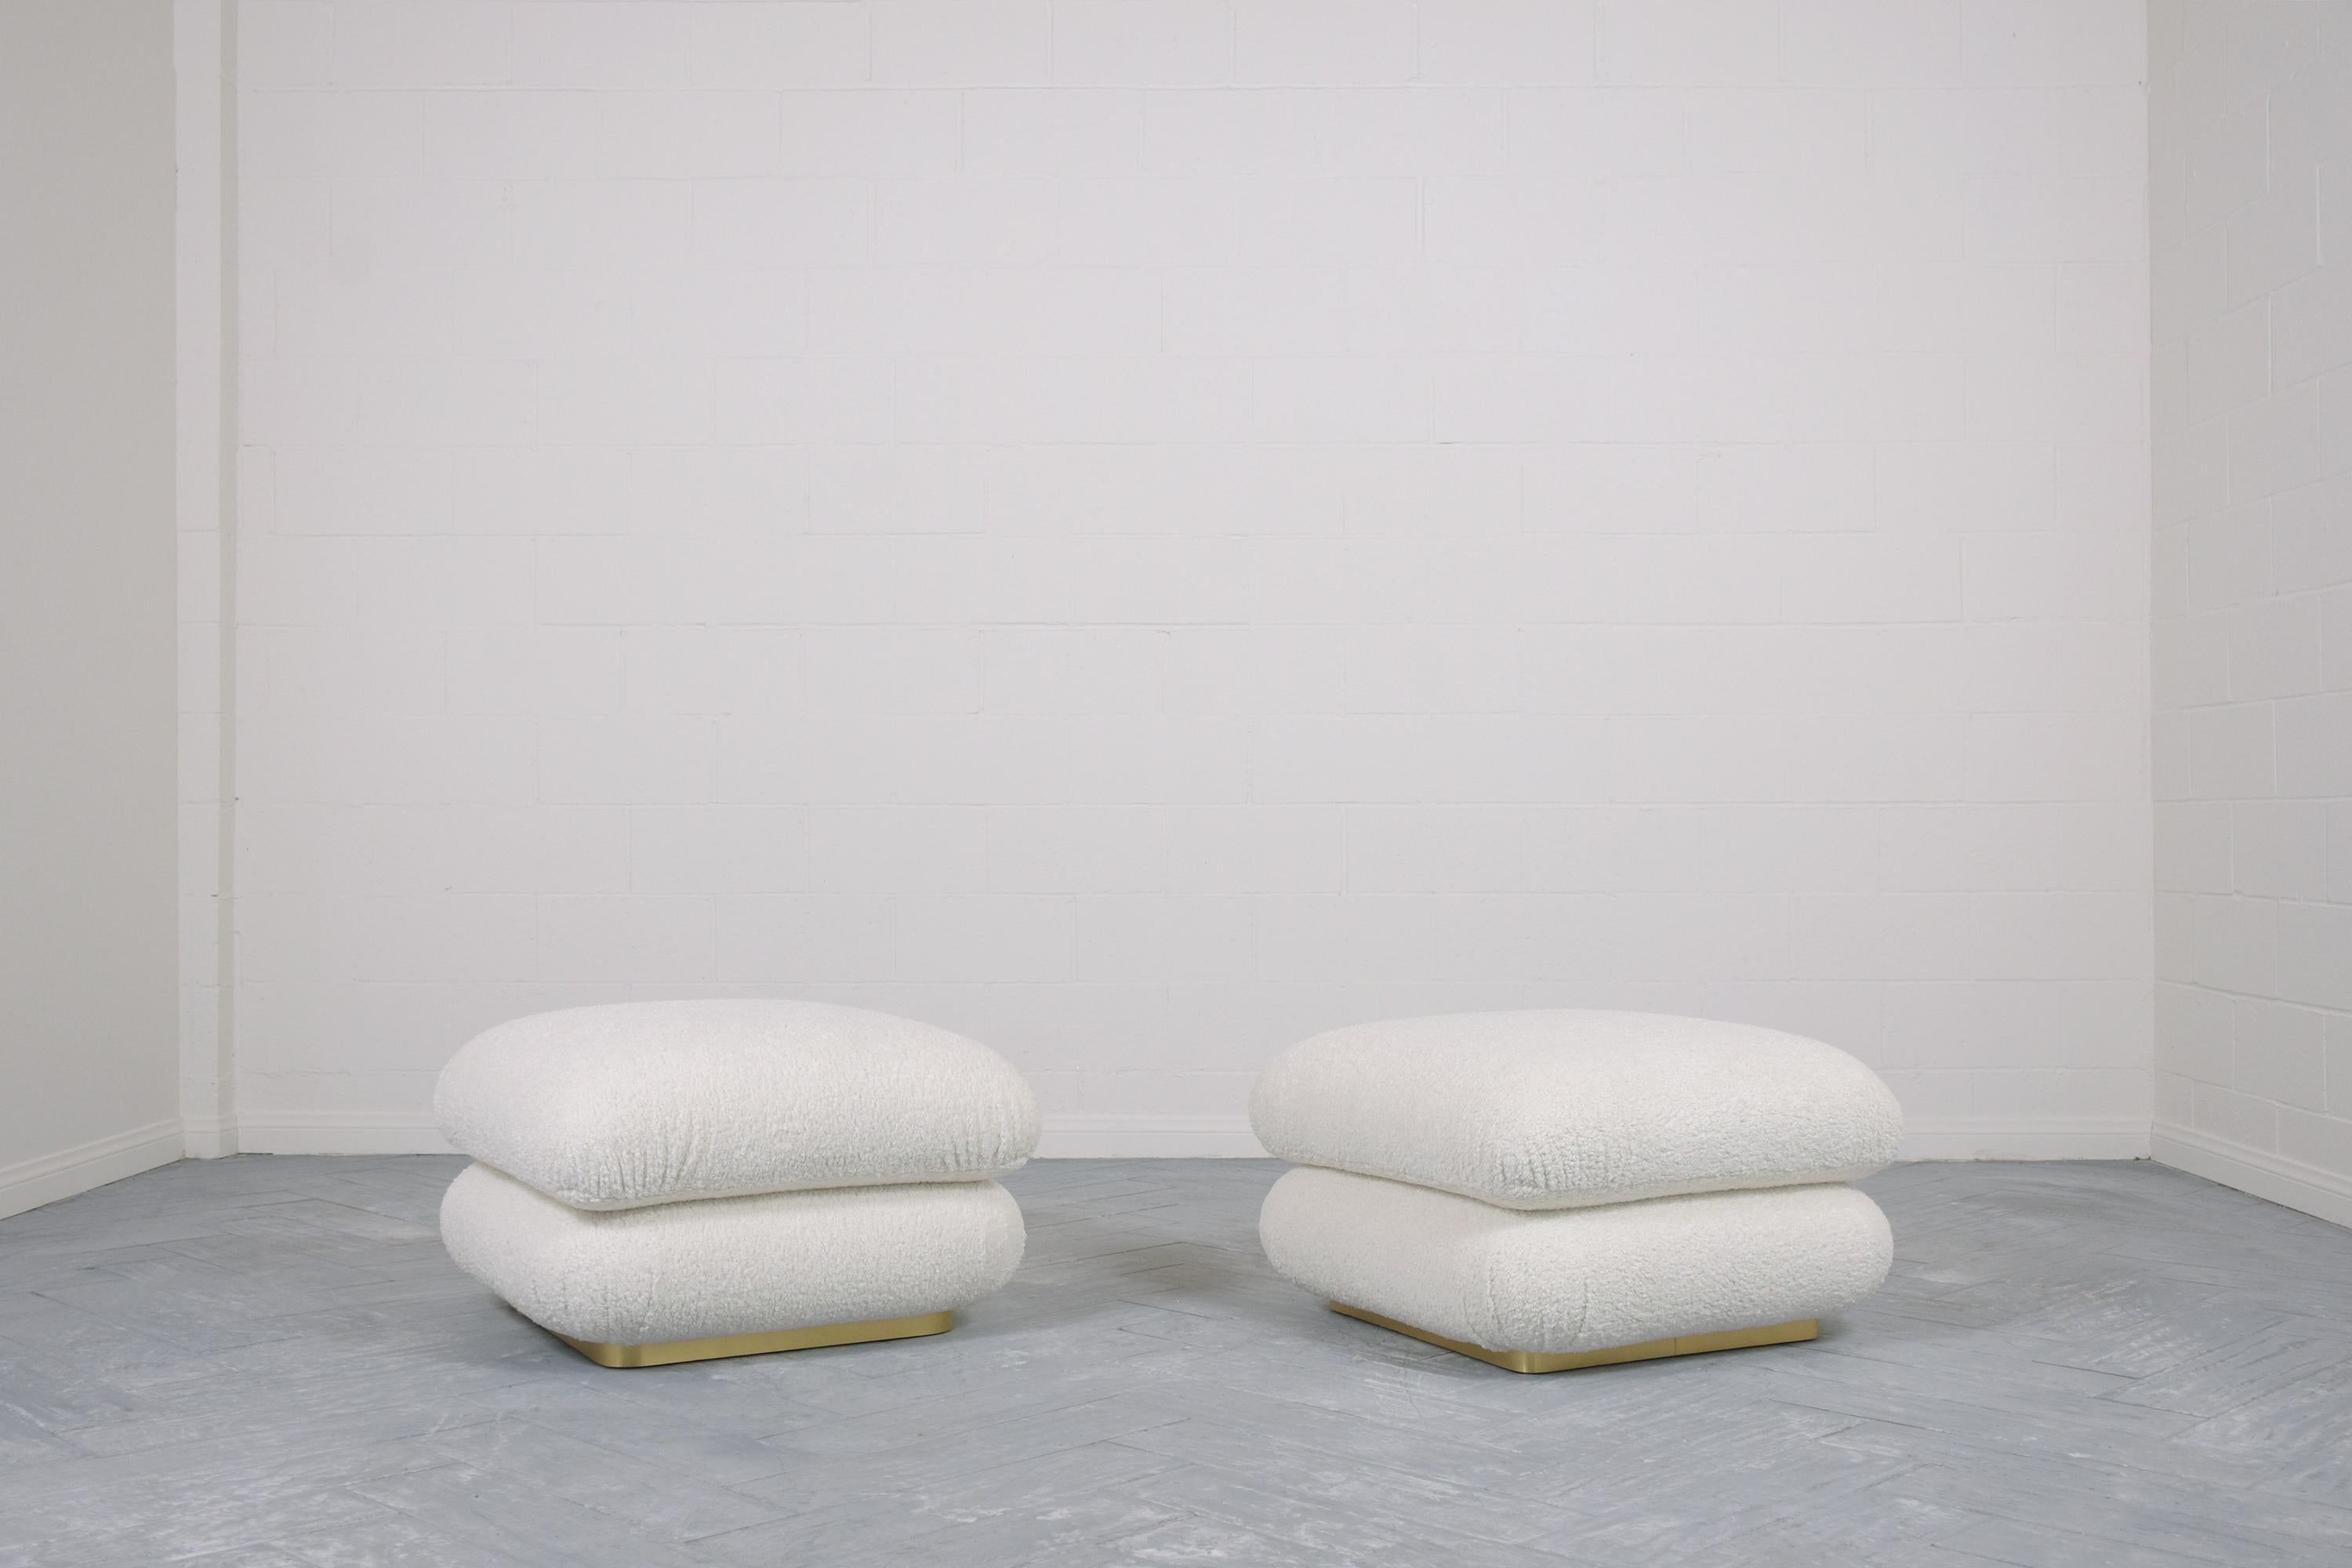 An extraordinary pair of mid-1970s poufs or ottomans beautifully crafted out of wood in great condition professionally restored and upholstered by our craftsmen team. These fabulous poufs consist of two comfortable cushions connected together